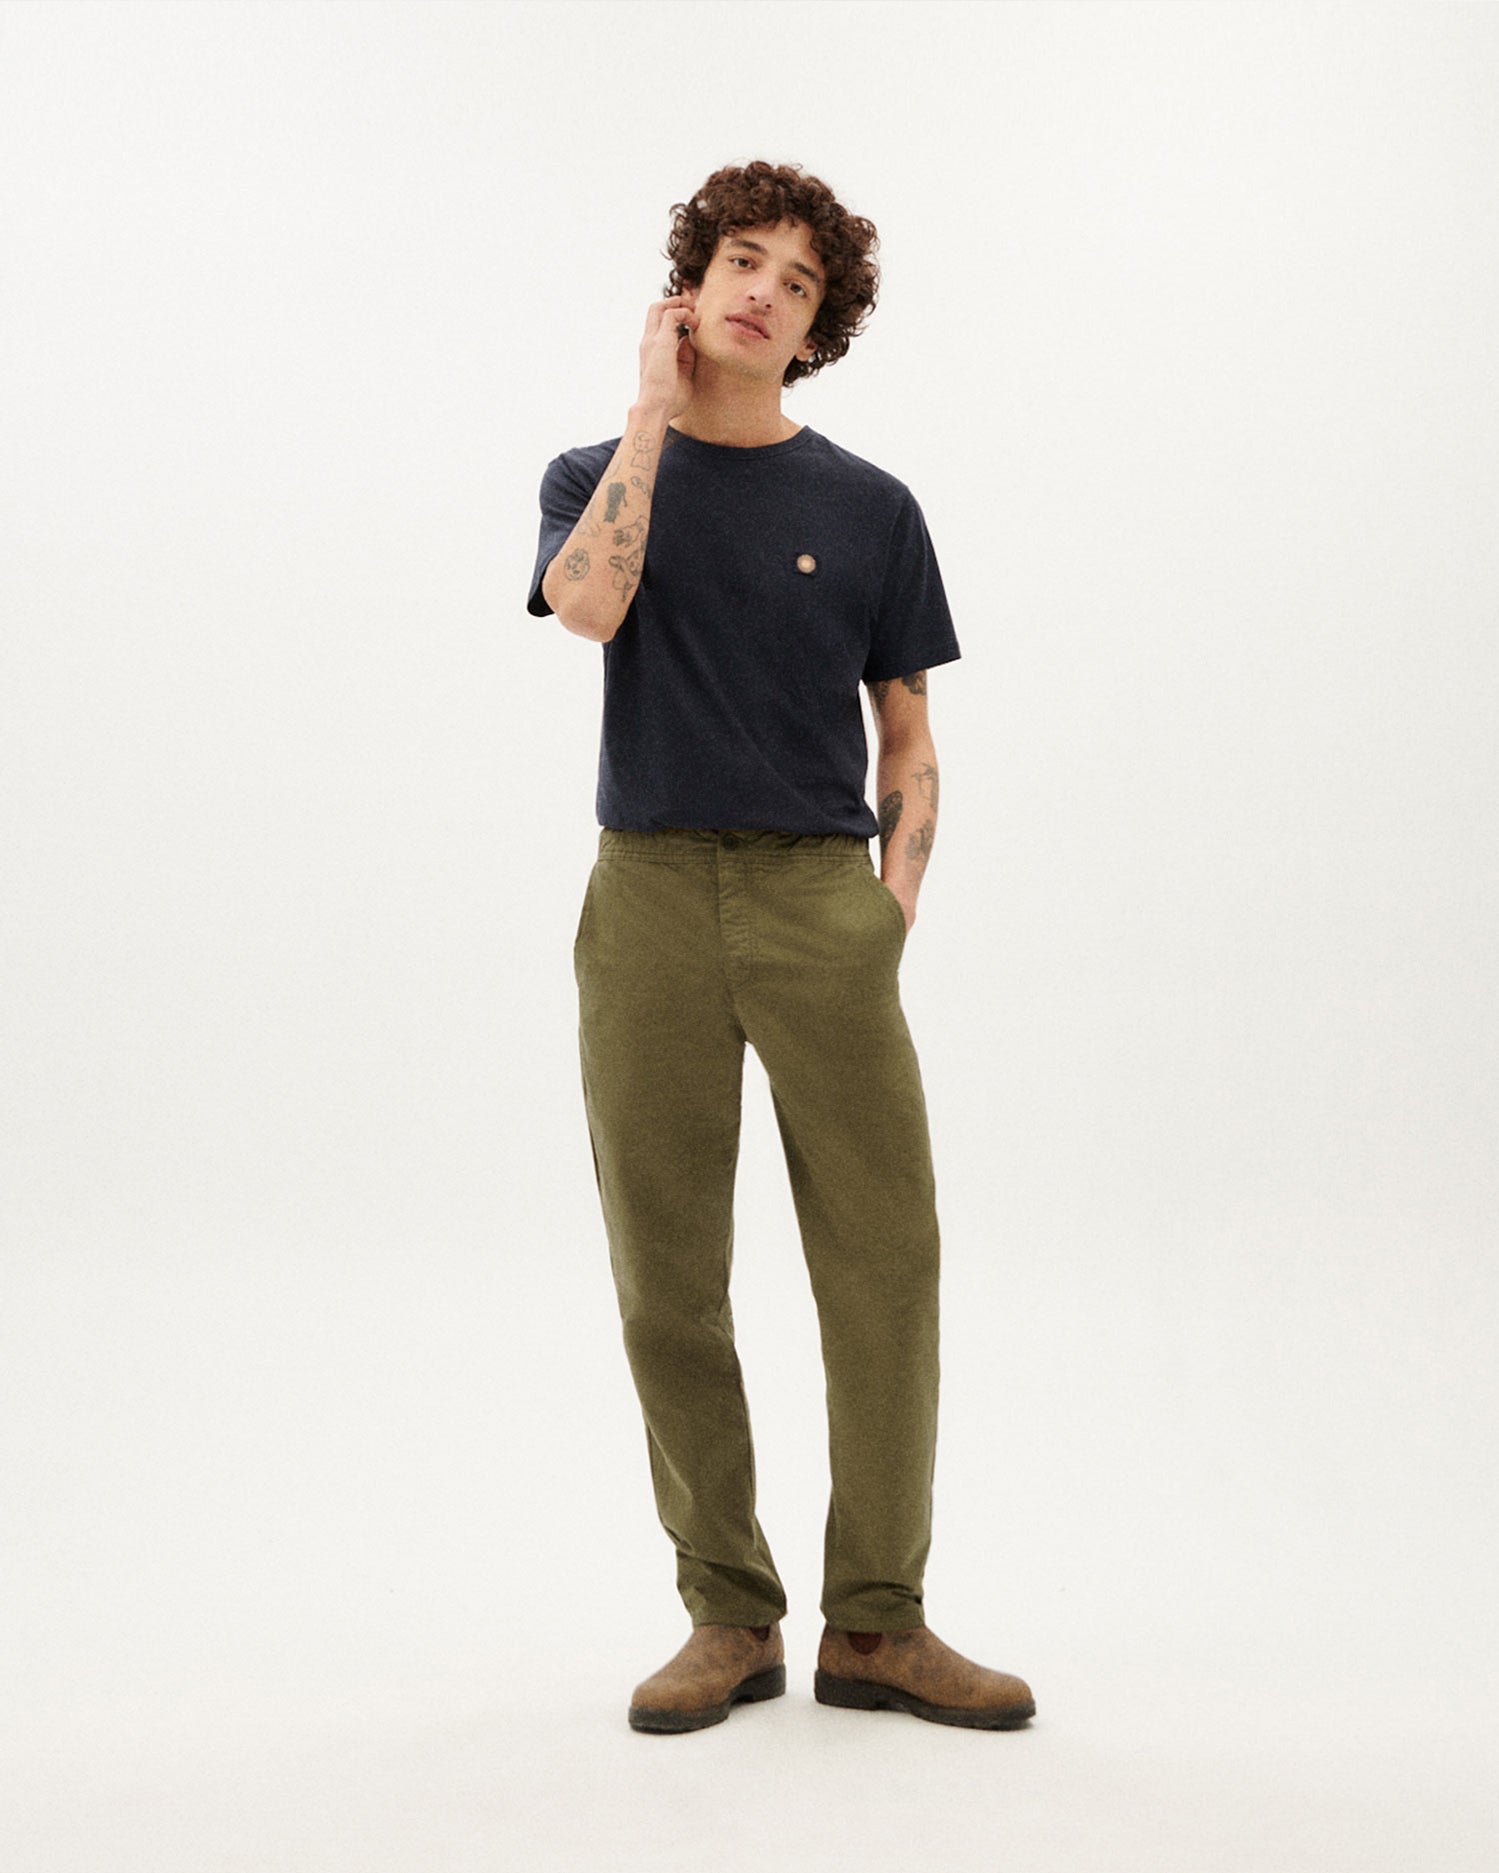 Slim Fit Straight Casual Girls Modern Light Weight Trousers (olive-green)  Age Group: 16-18 at Best Price in Kasganj | Shri Radha Madhav Collection